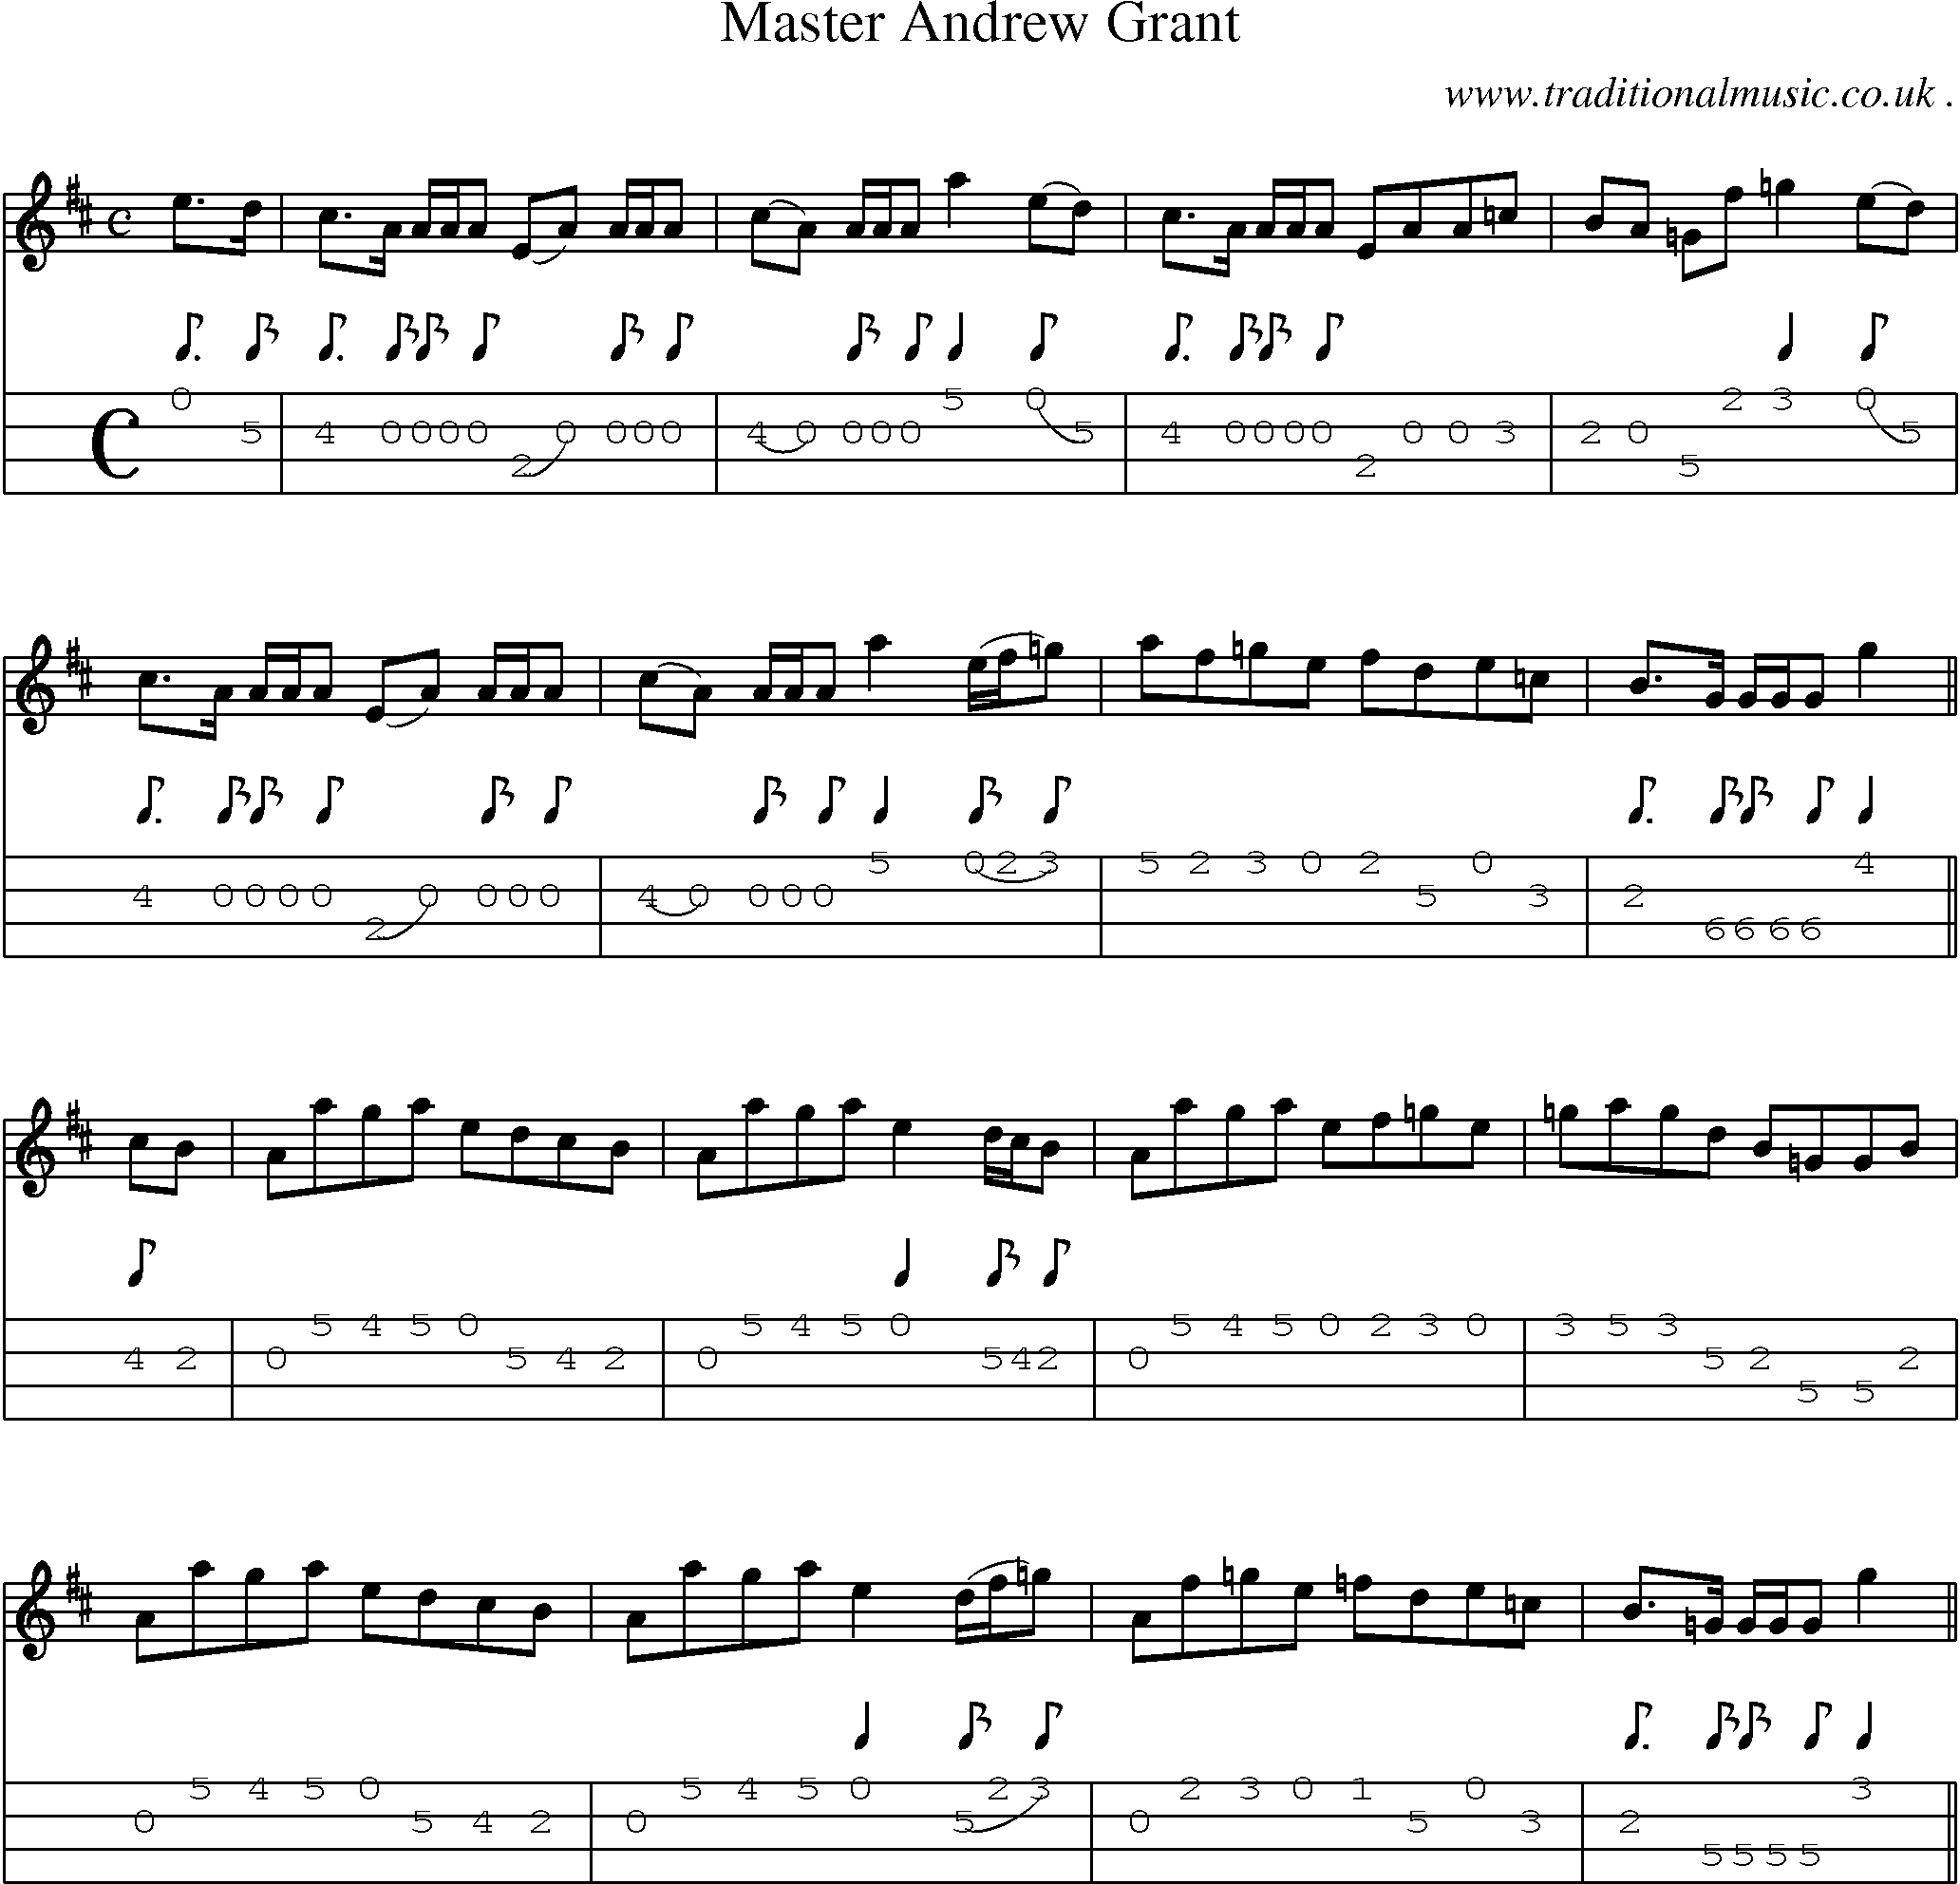 Sheet-music  score, Chords and Mandolin Tabs for Master Andrew Grant